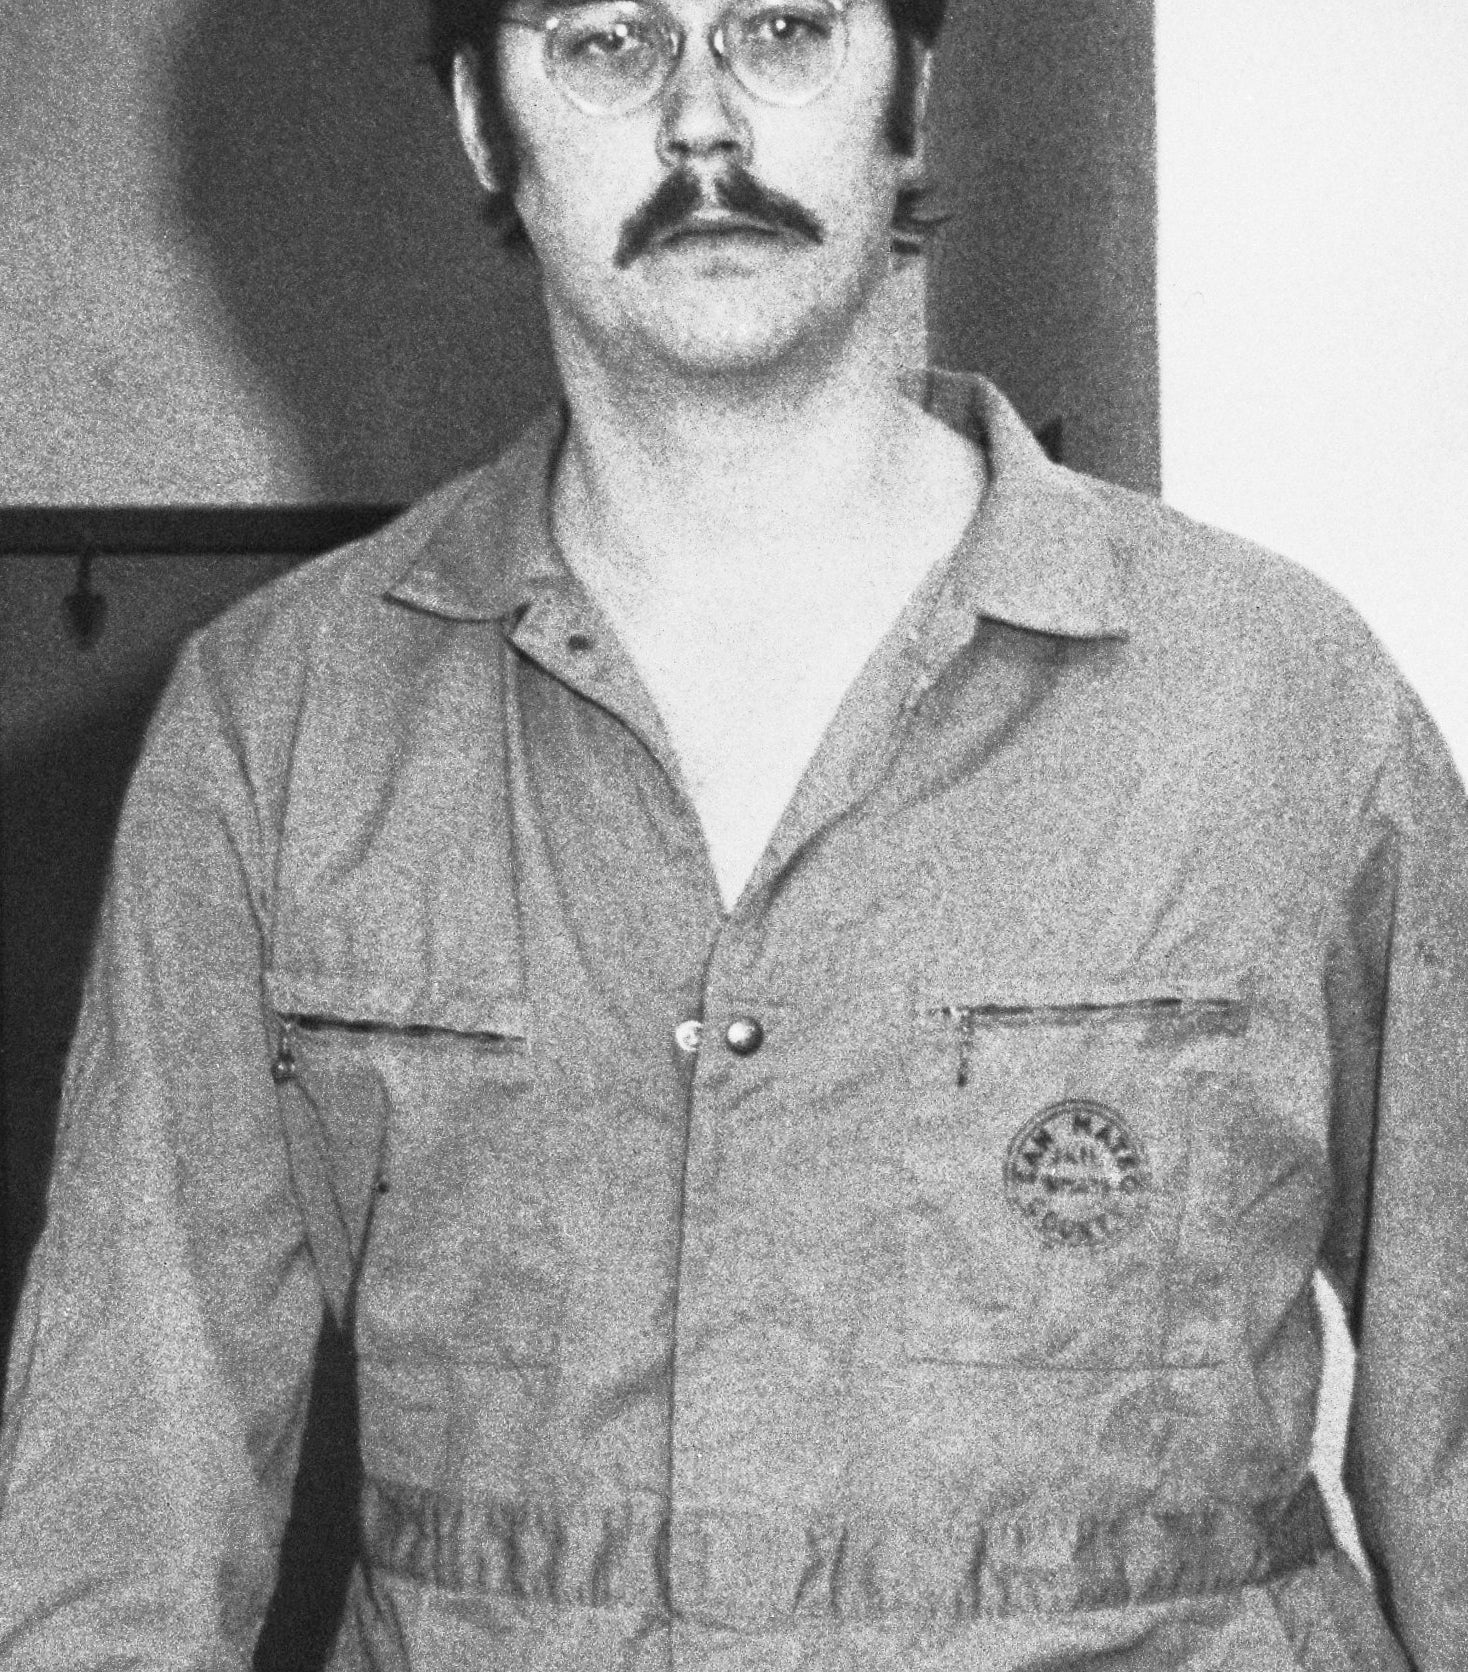 Edmund in his prison uniform with a mustache and glasses